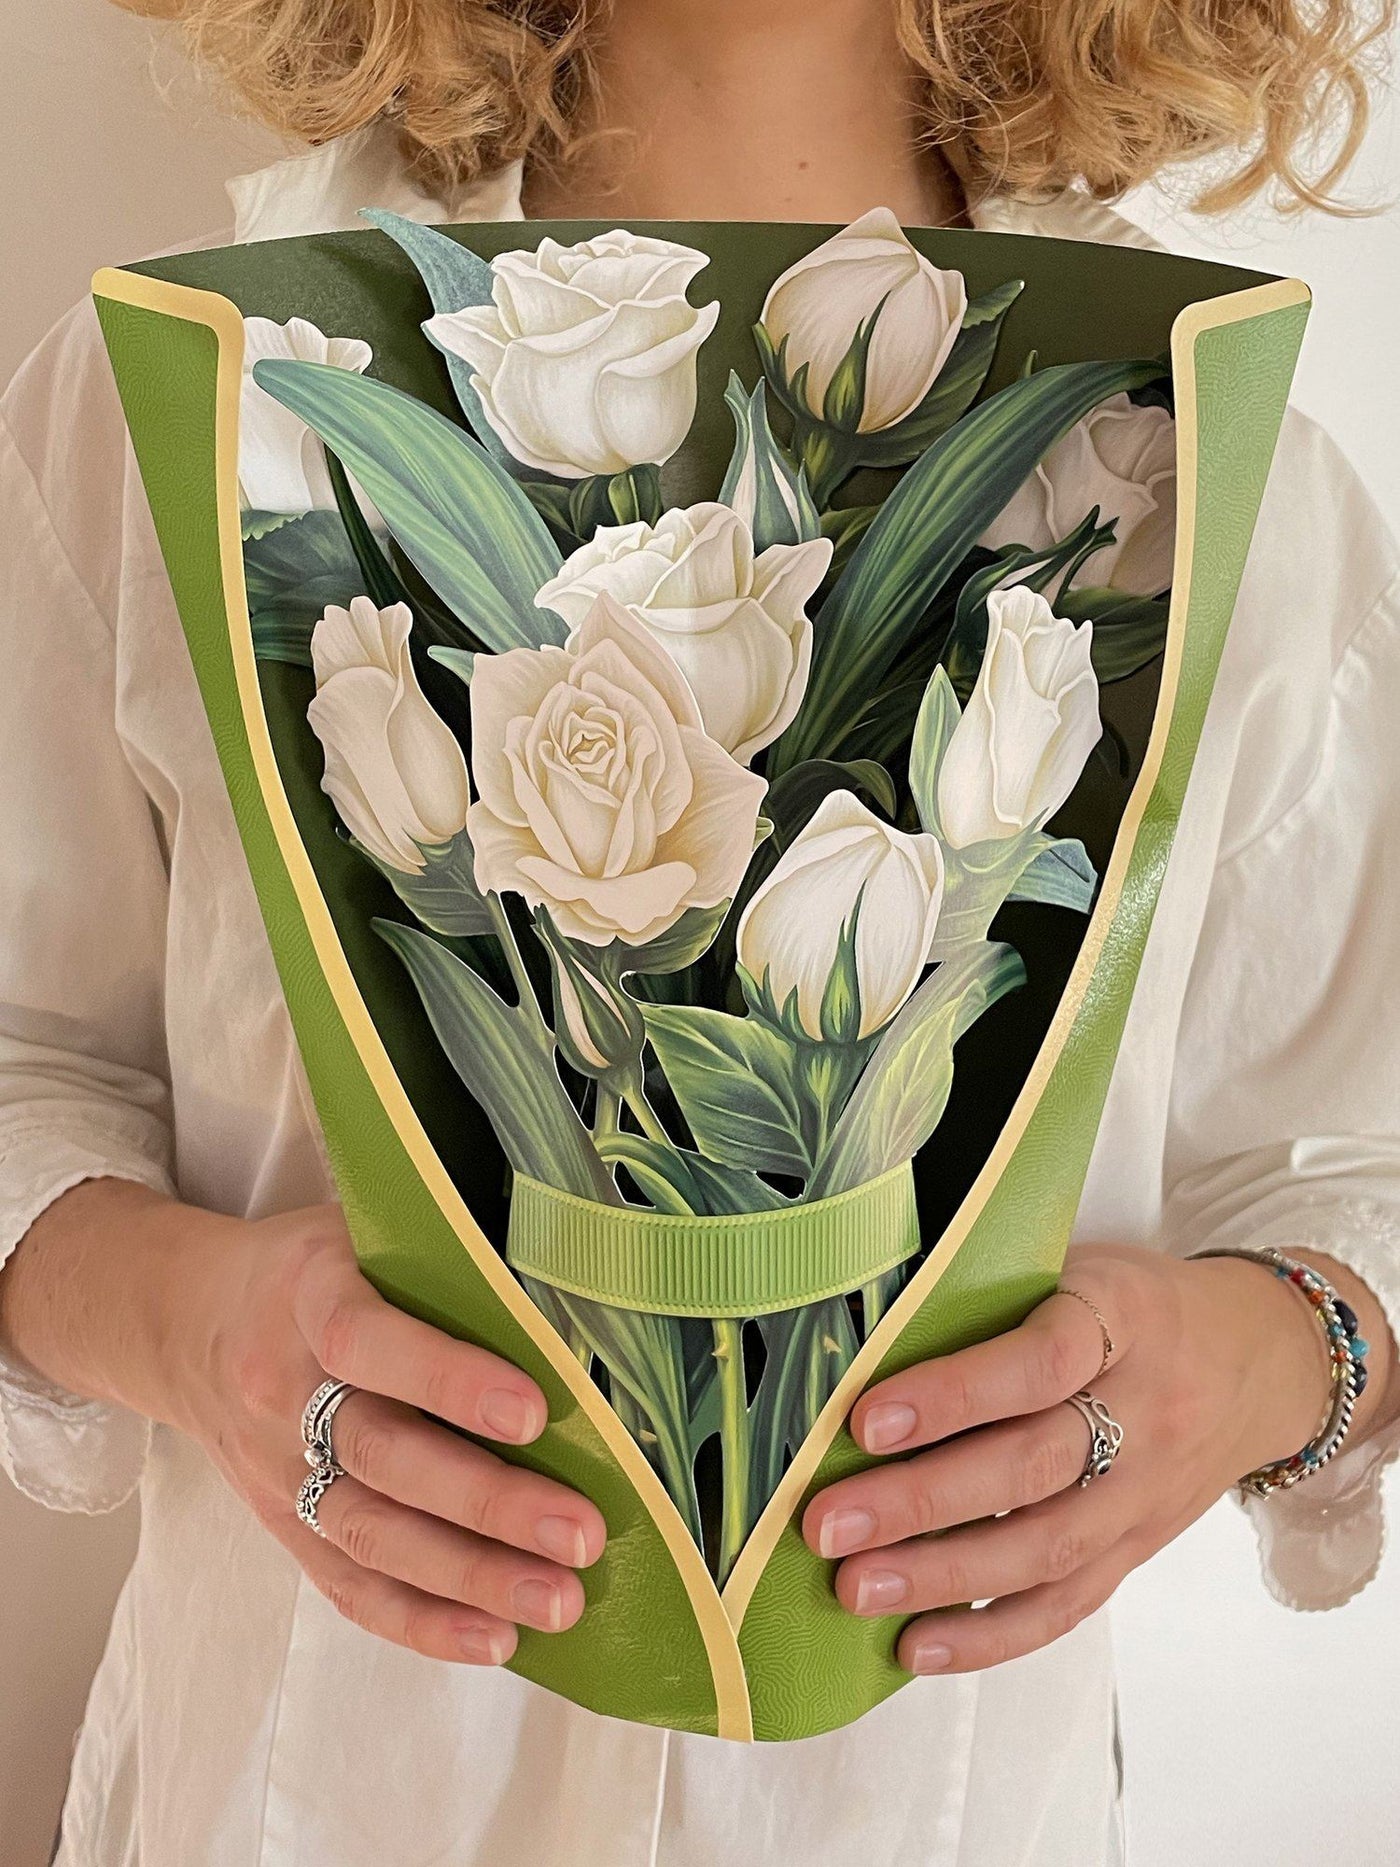 FCP - White Roses Paper Bouquet - Knock Your Socks Off